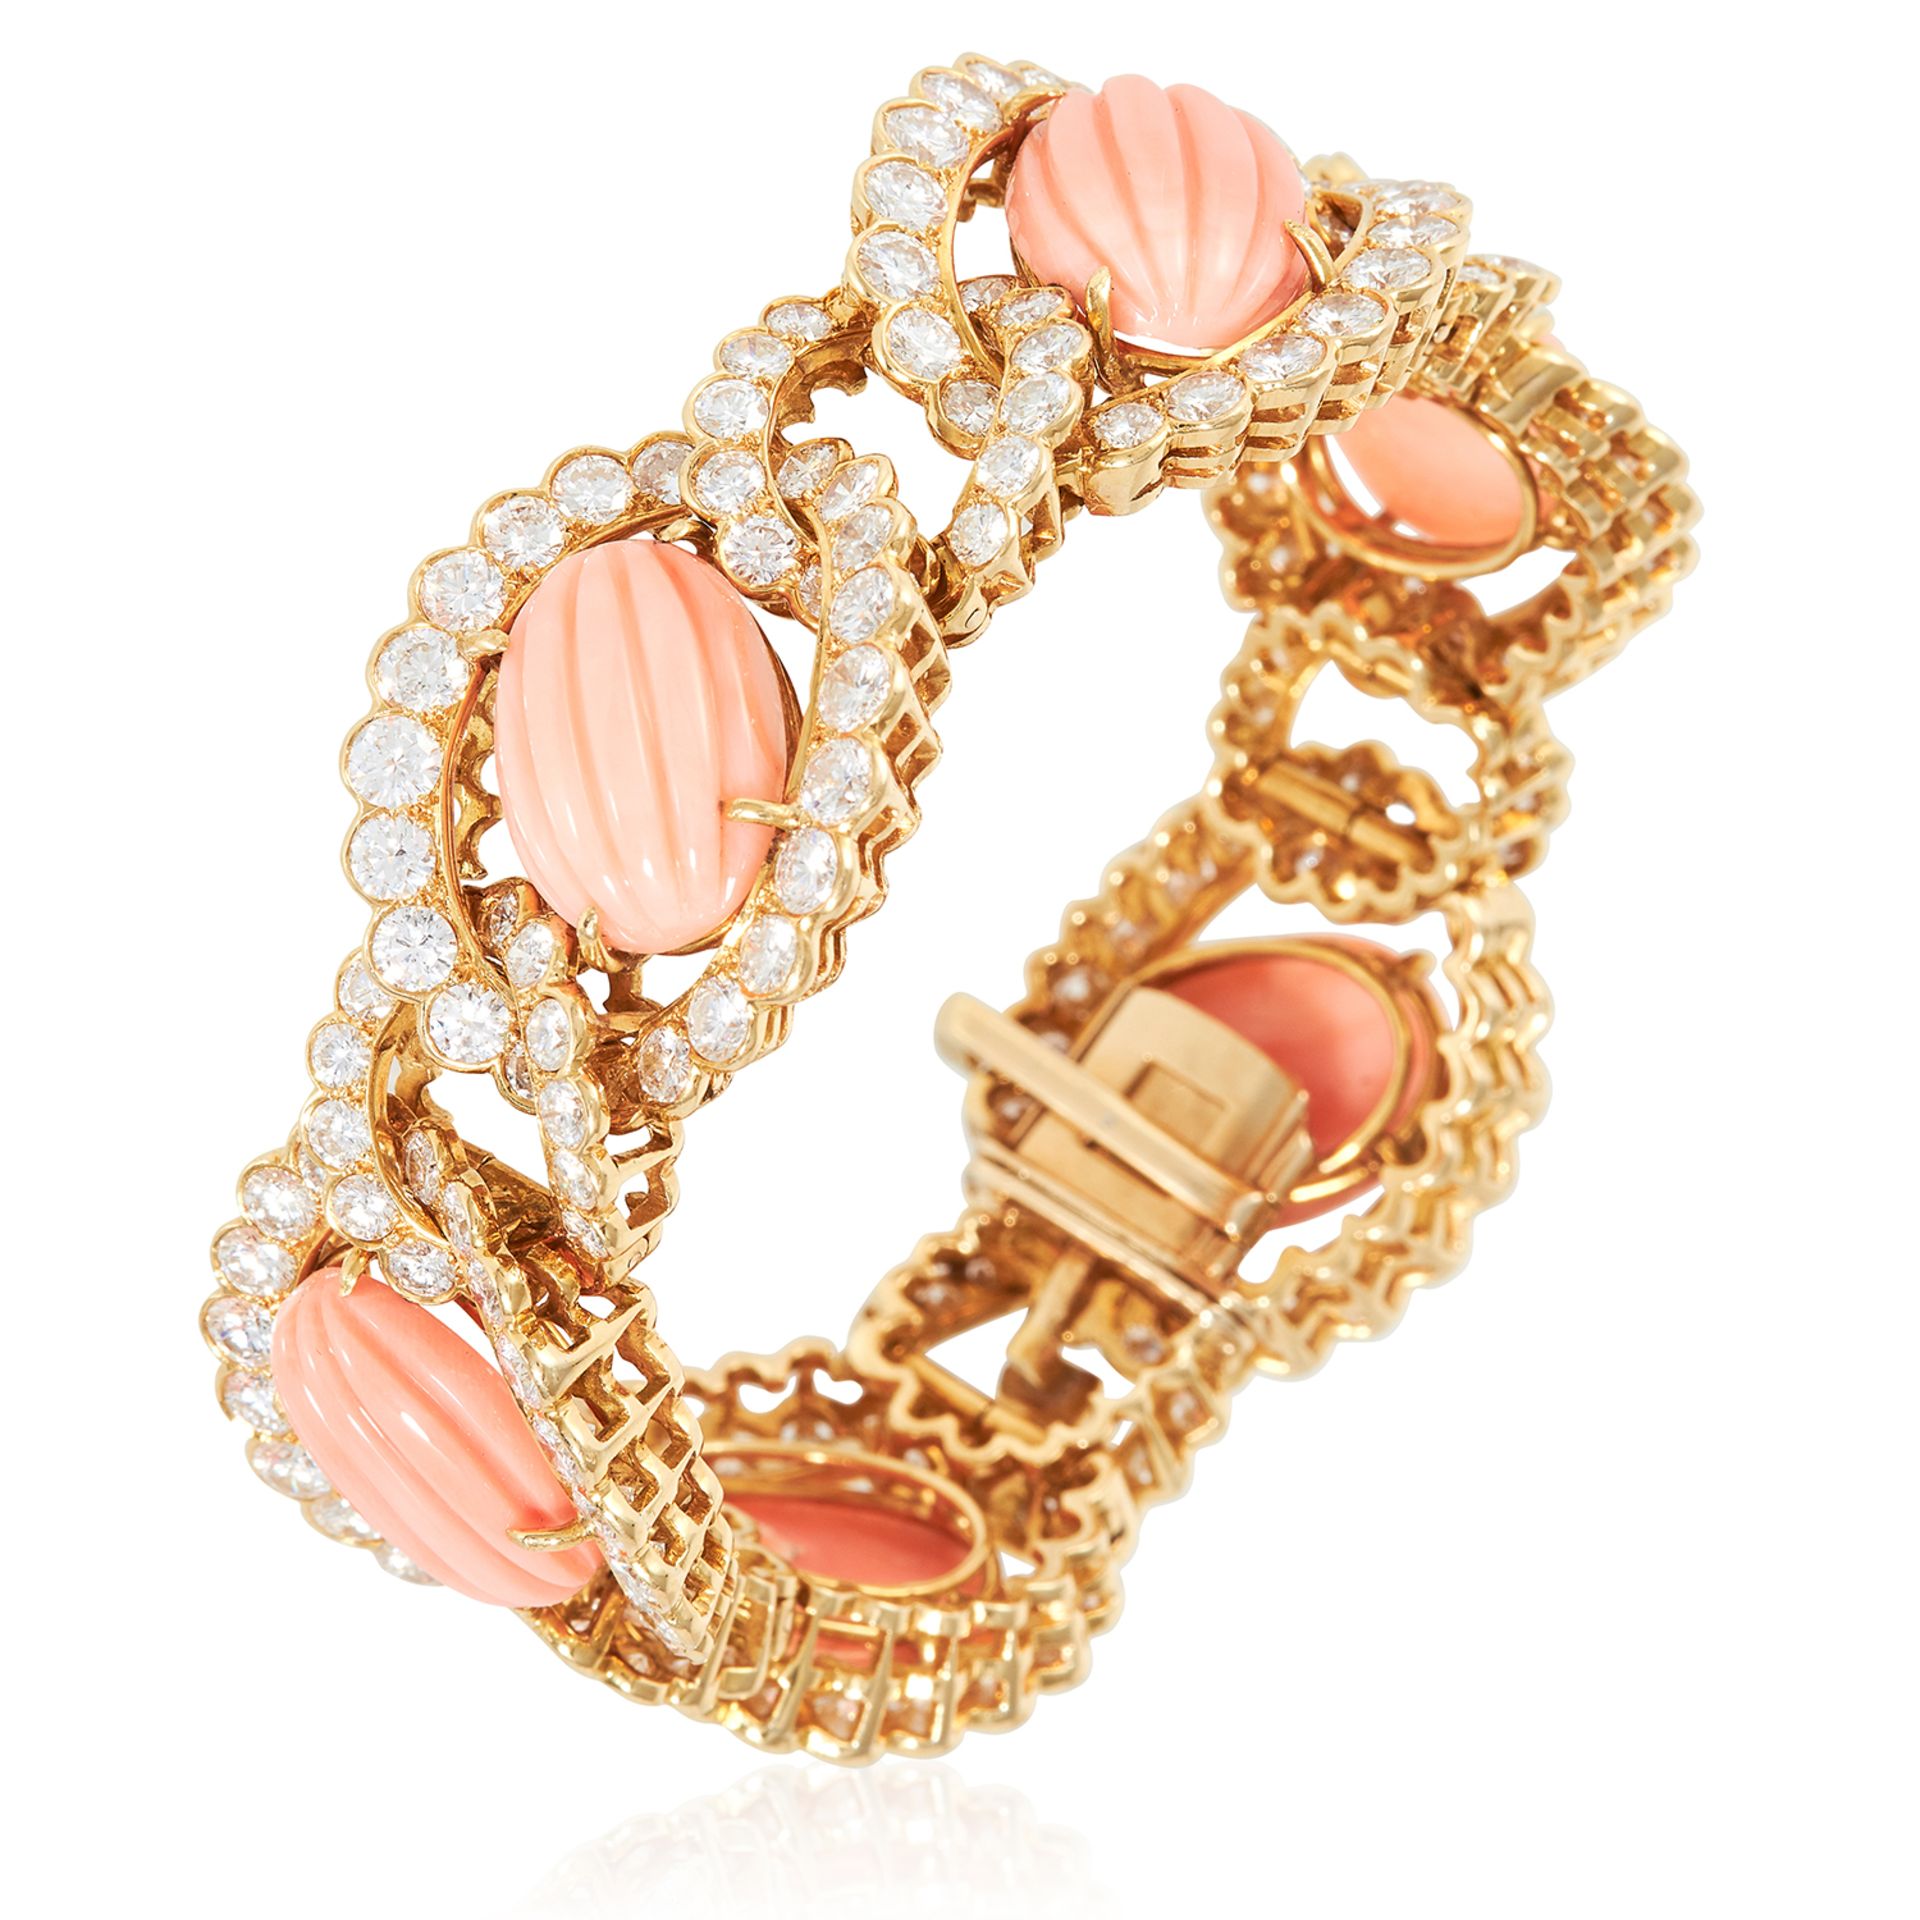 A VINTAGE CORAL AND DIAMOND BRACELET, VAN CLEEF & ARPELS CIRCA 1955 in 18ct yellow gold, the six